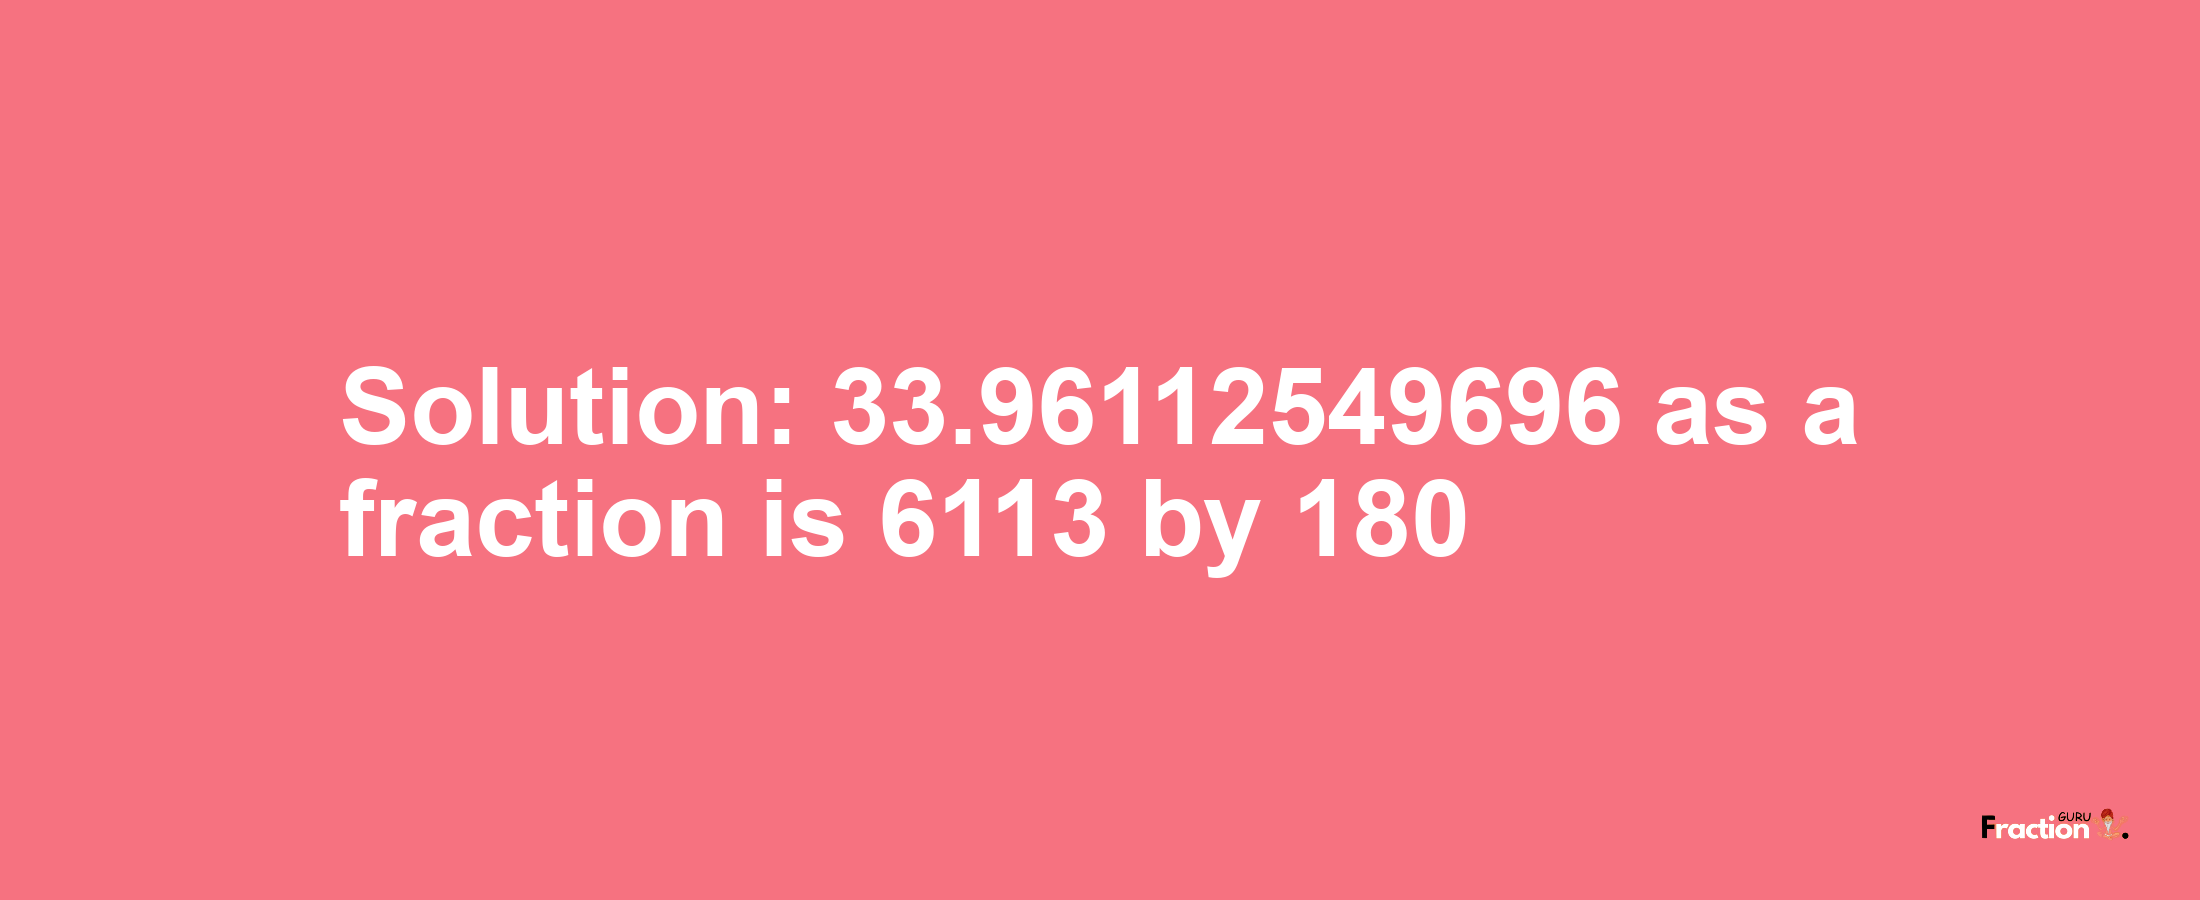 Solution:33.96112549696 as a fraction is 6113/180